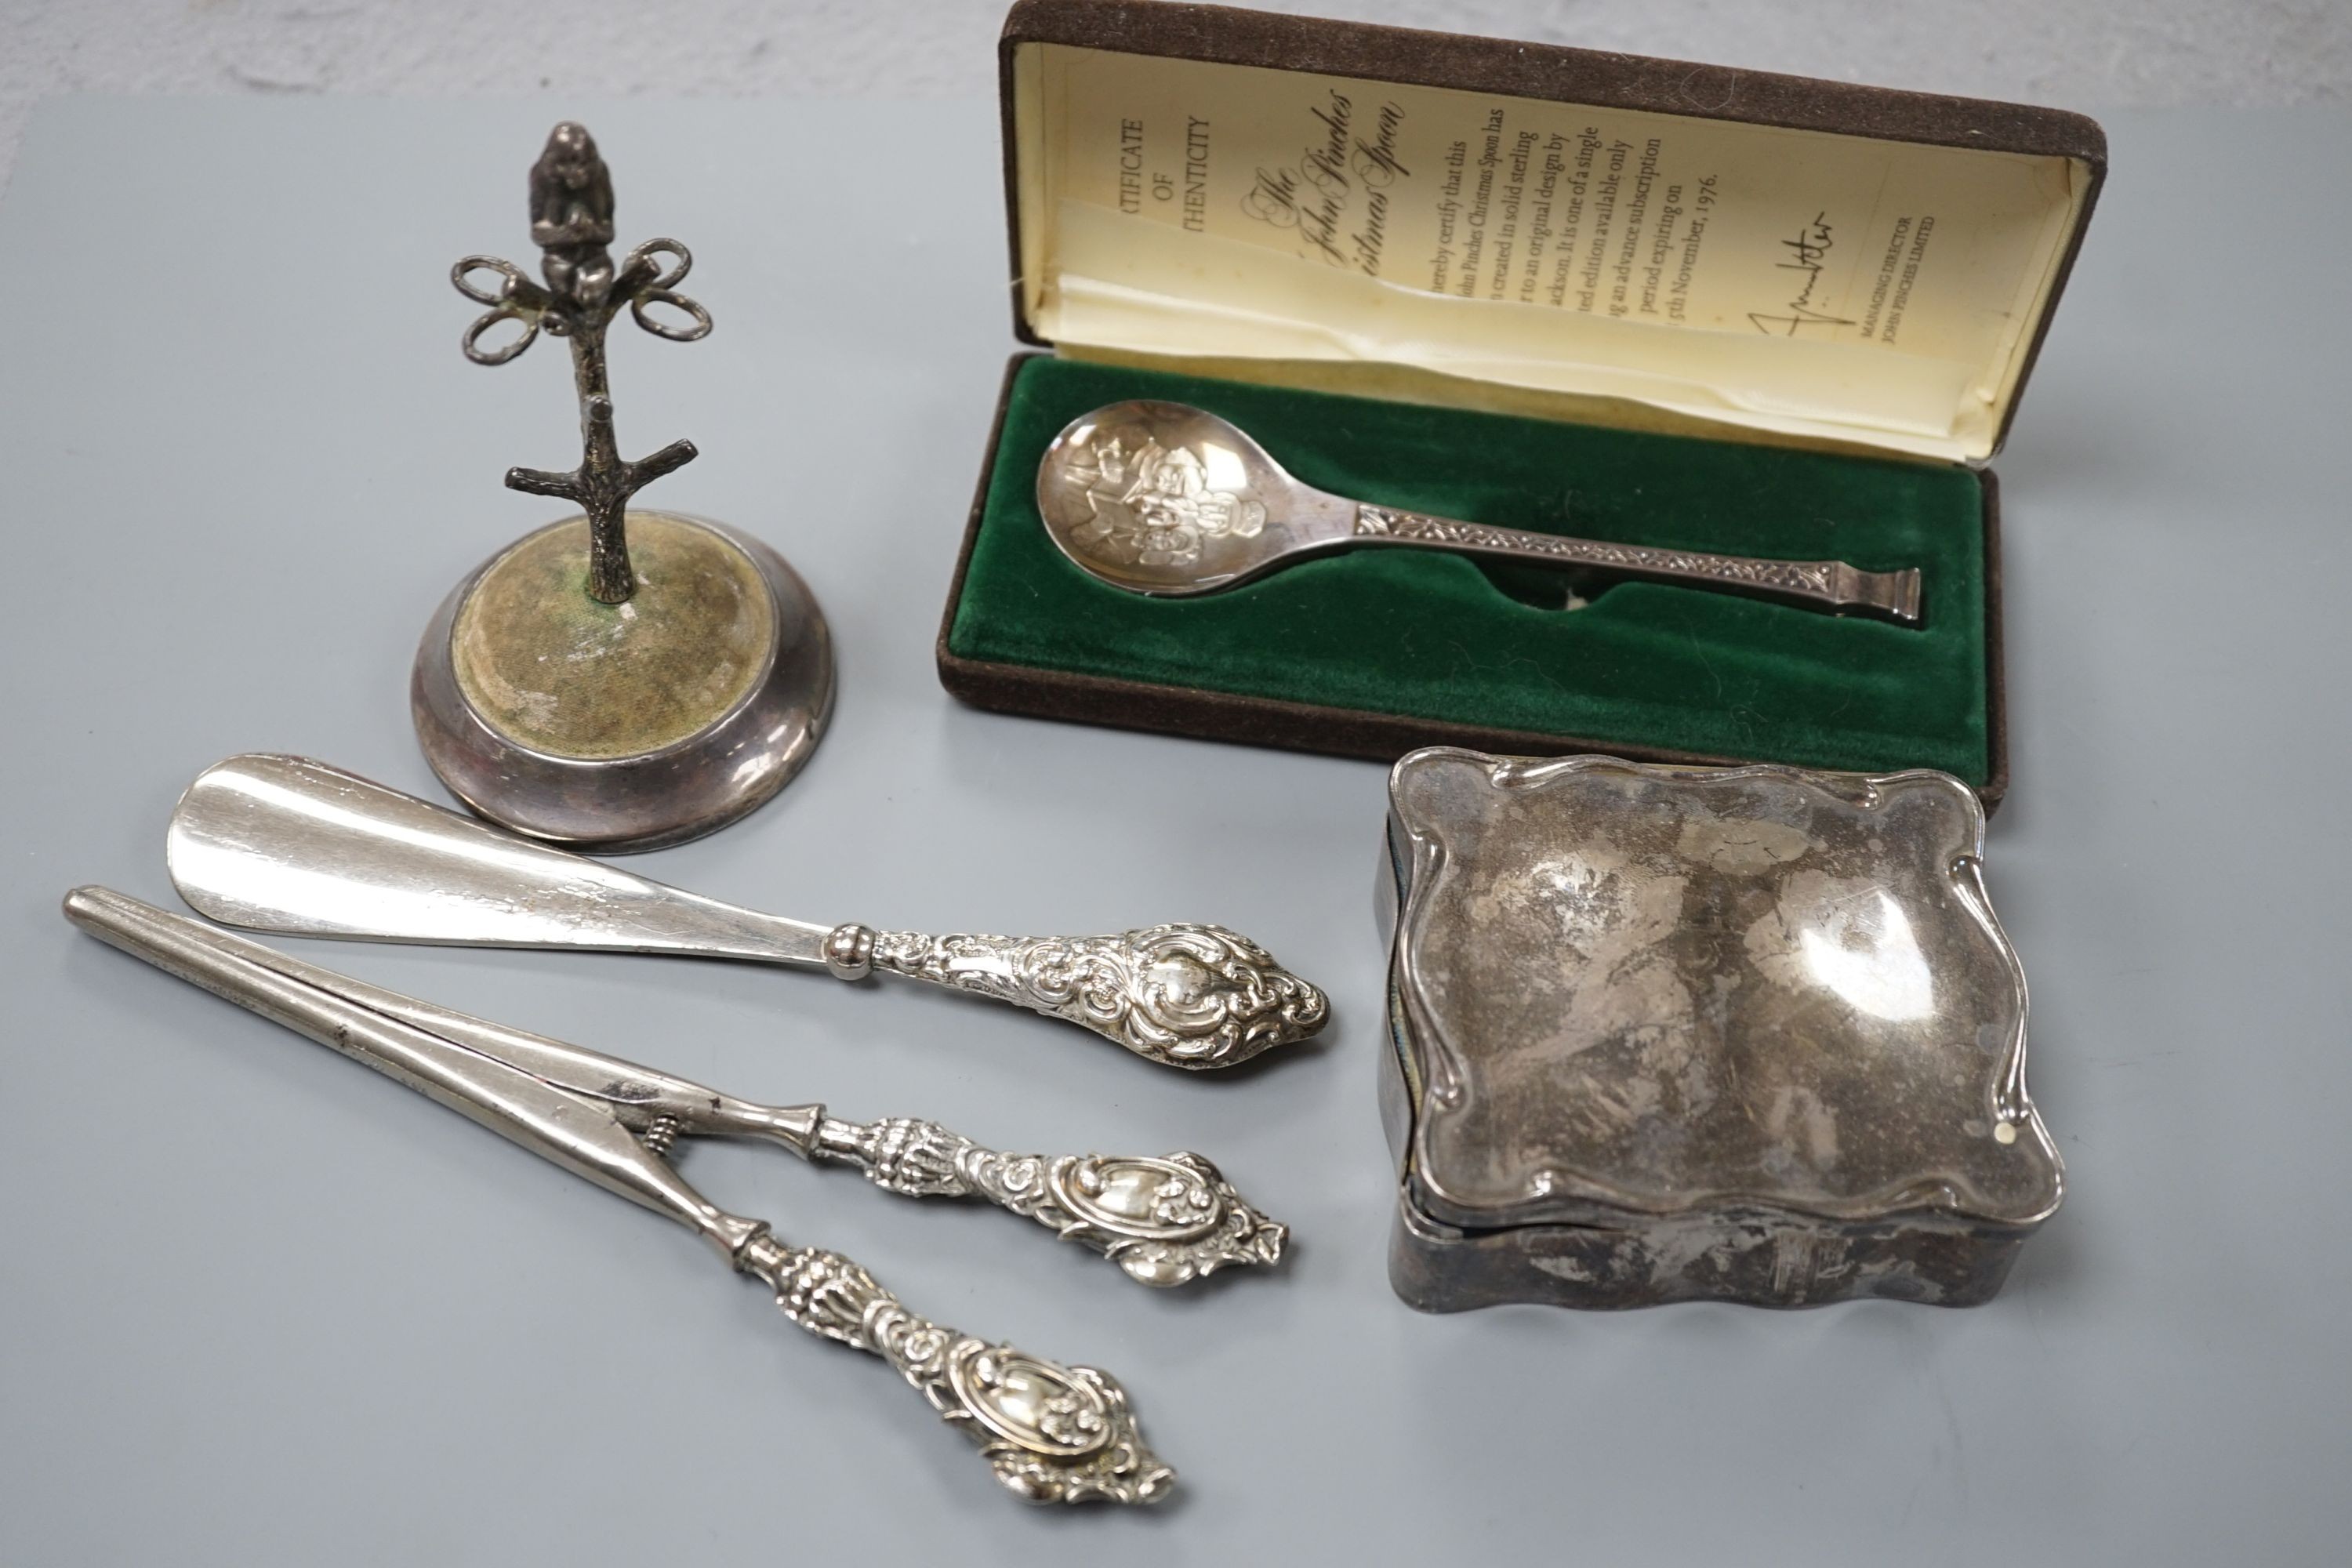 A George V silver mounted hat pin stand, two silver spoons, a silver mounted trinket box, a pair of glove stretchers and a shoe horn.